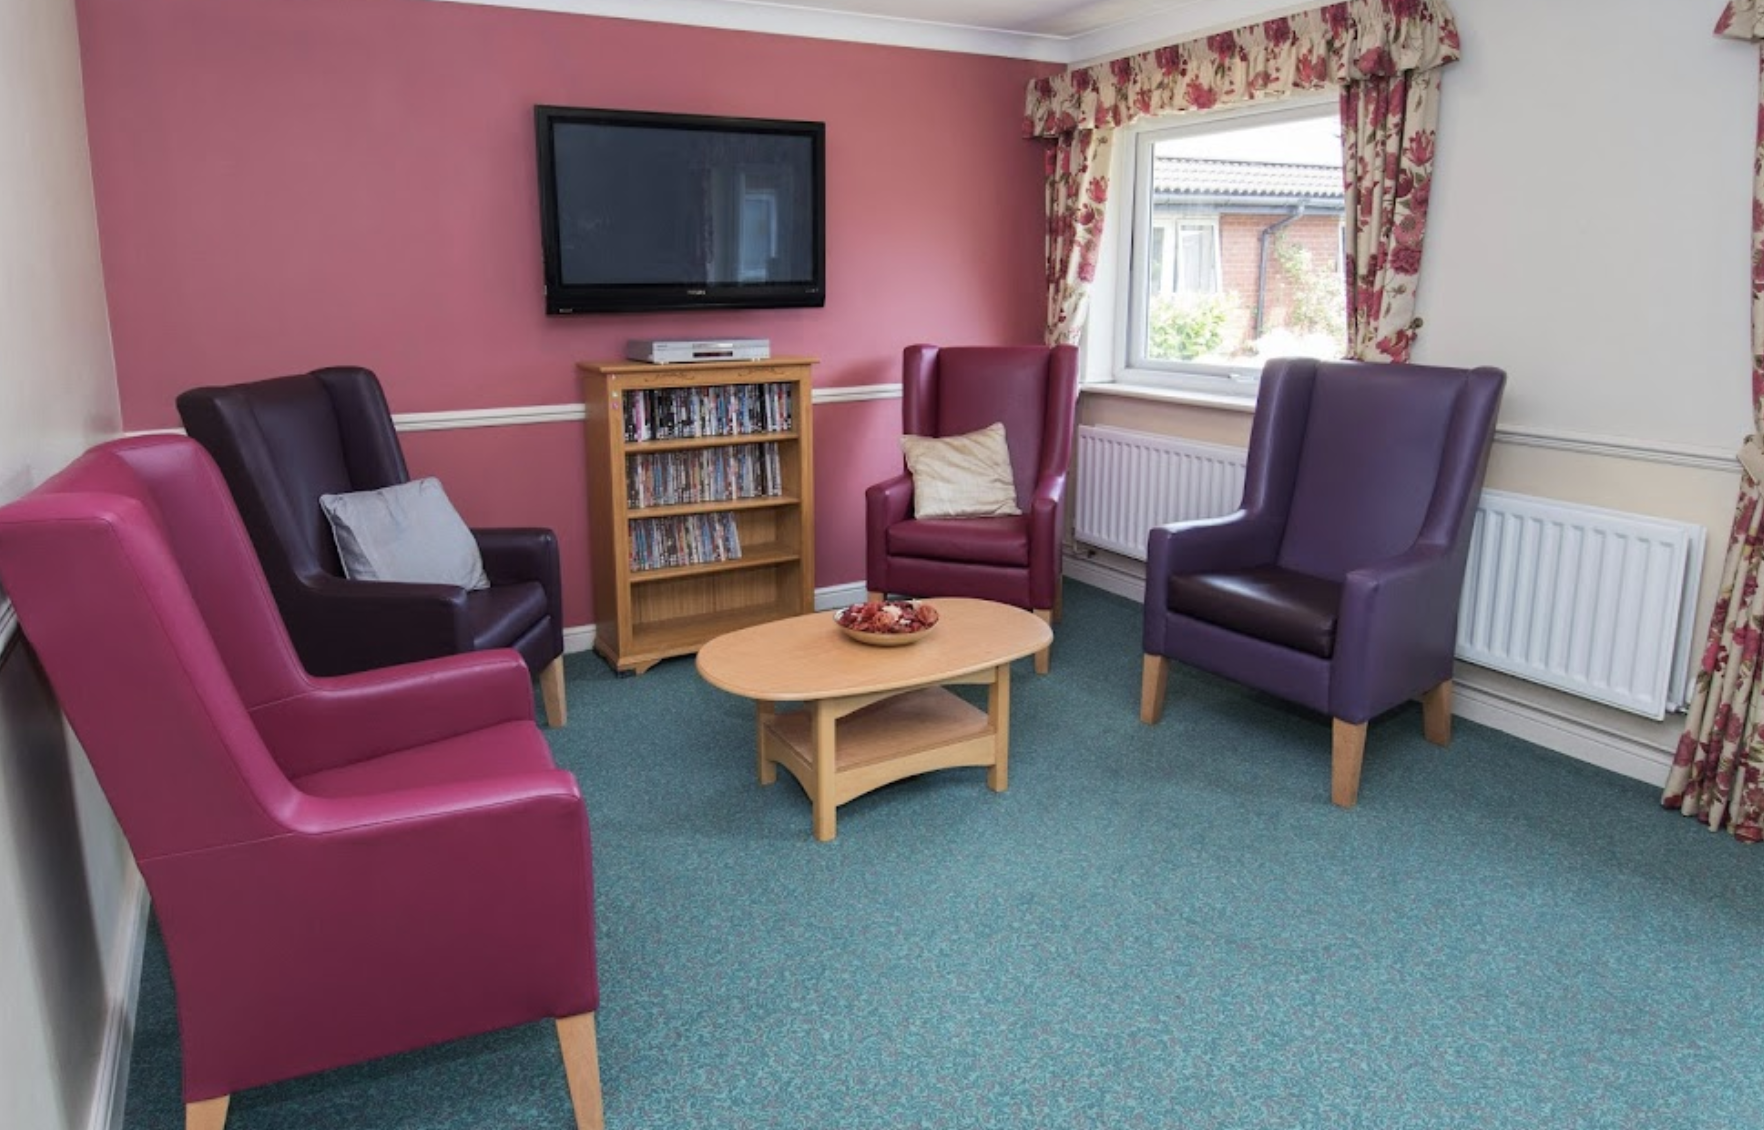 Lounge of Colonia Court care home in Colchester, Essex